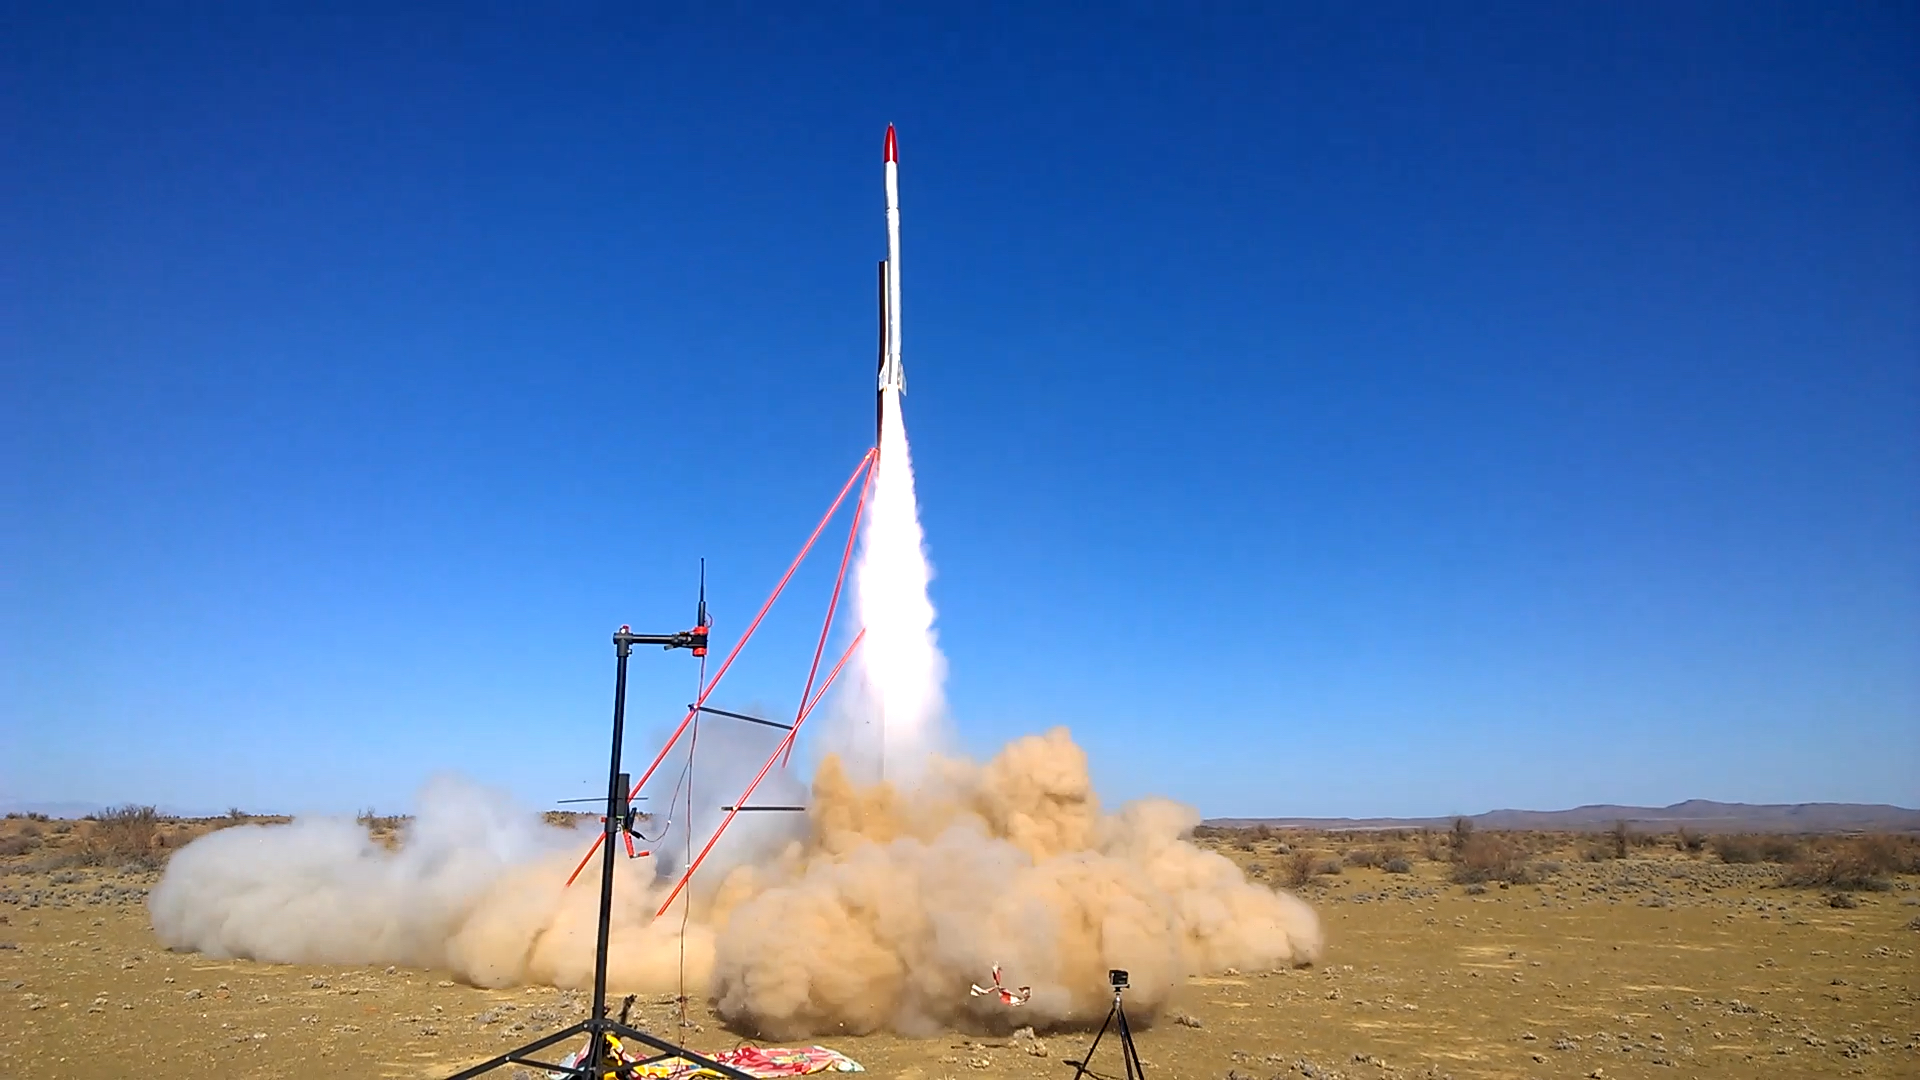 sa-set-new-record-for-highest-altitude-reached-with-amateur-rocket-1.jpg